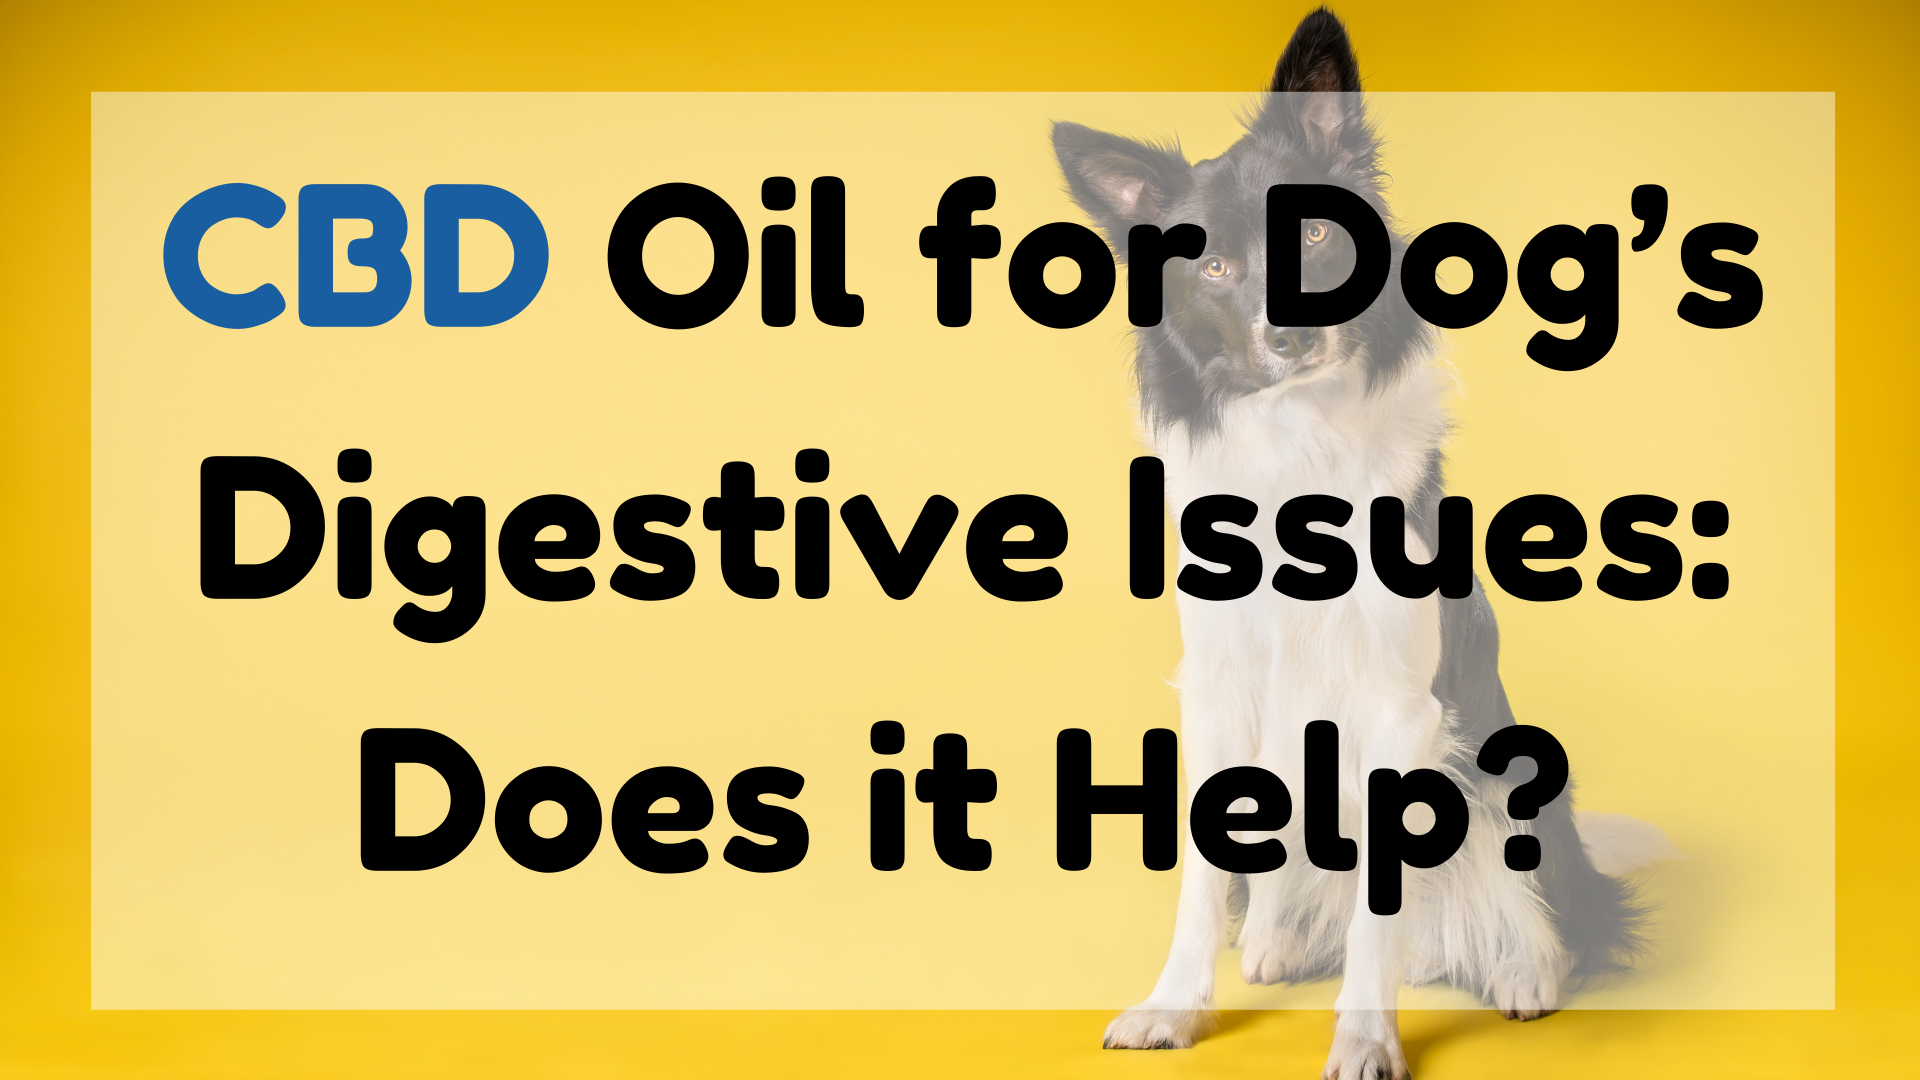 CBD Oil for Dogs Digestive Issues (1)